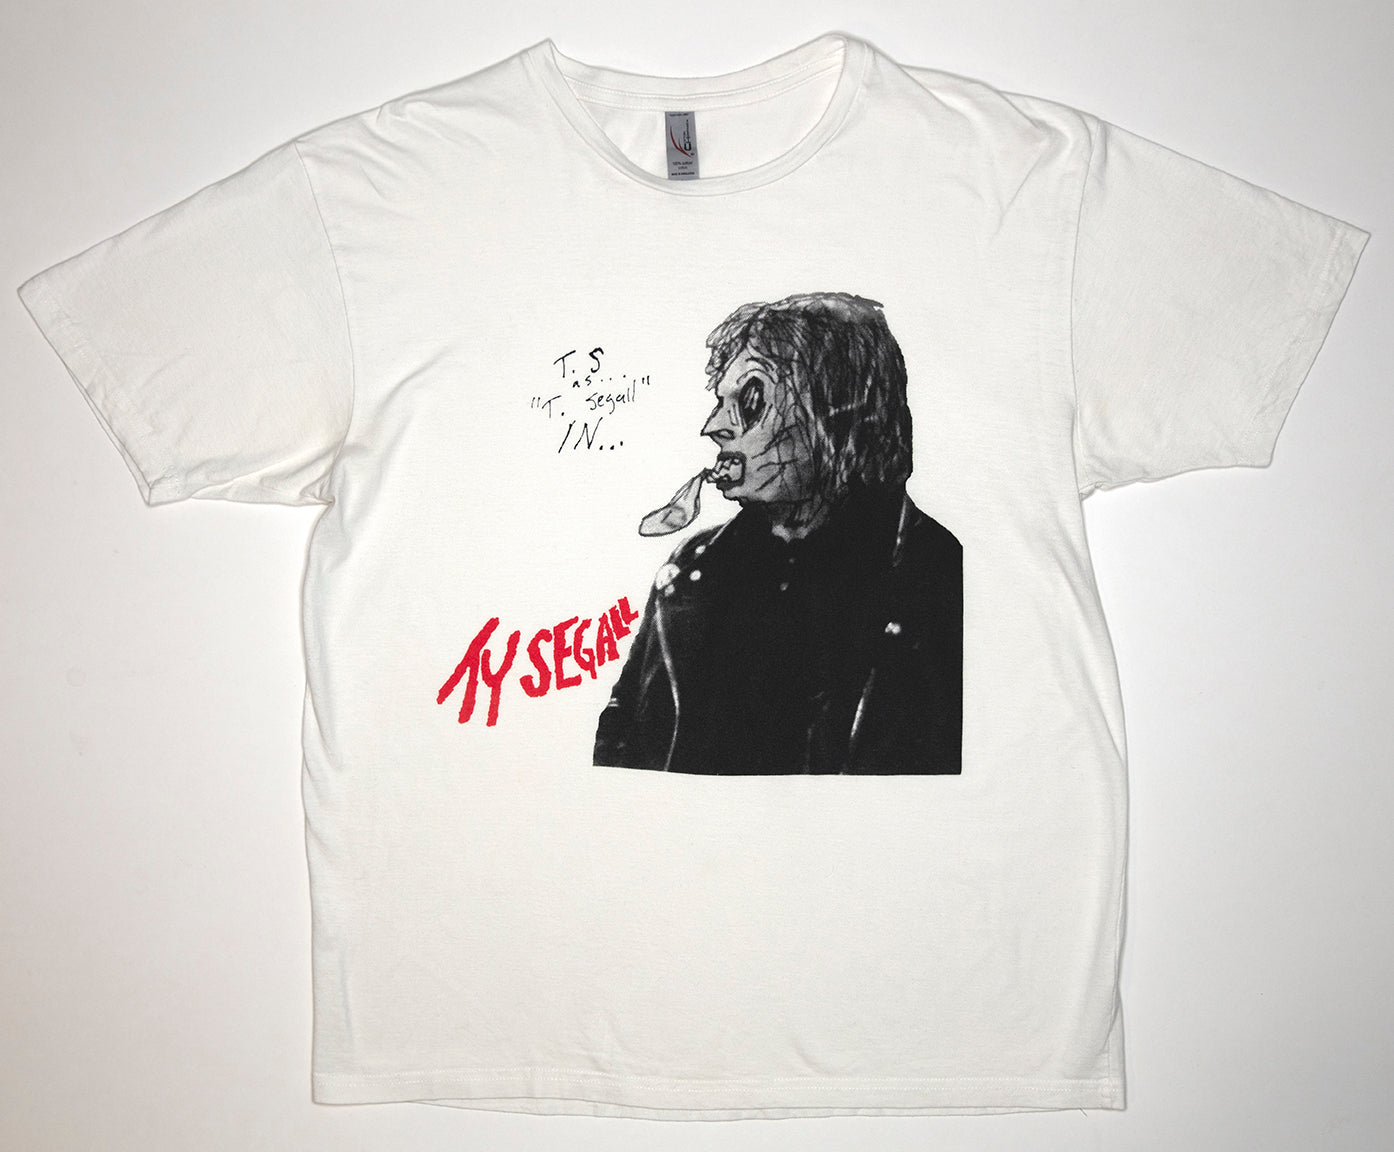 Ty Segall - T.S. As T. Segall In...Tour Shirt Size Large White